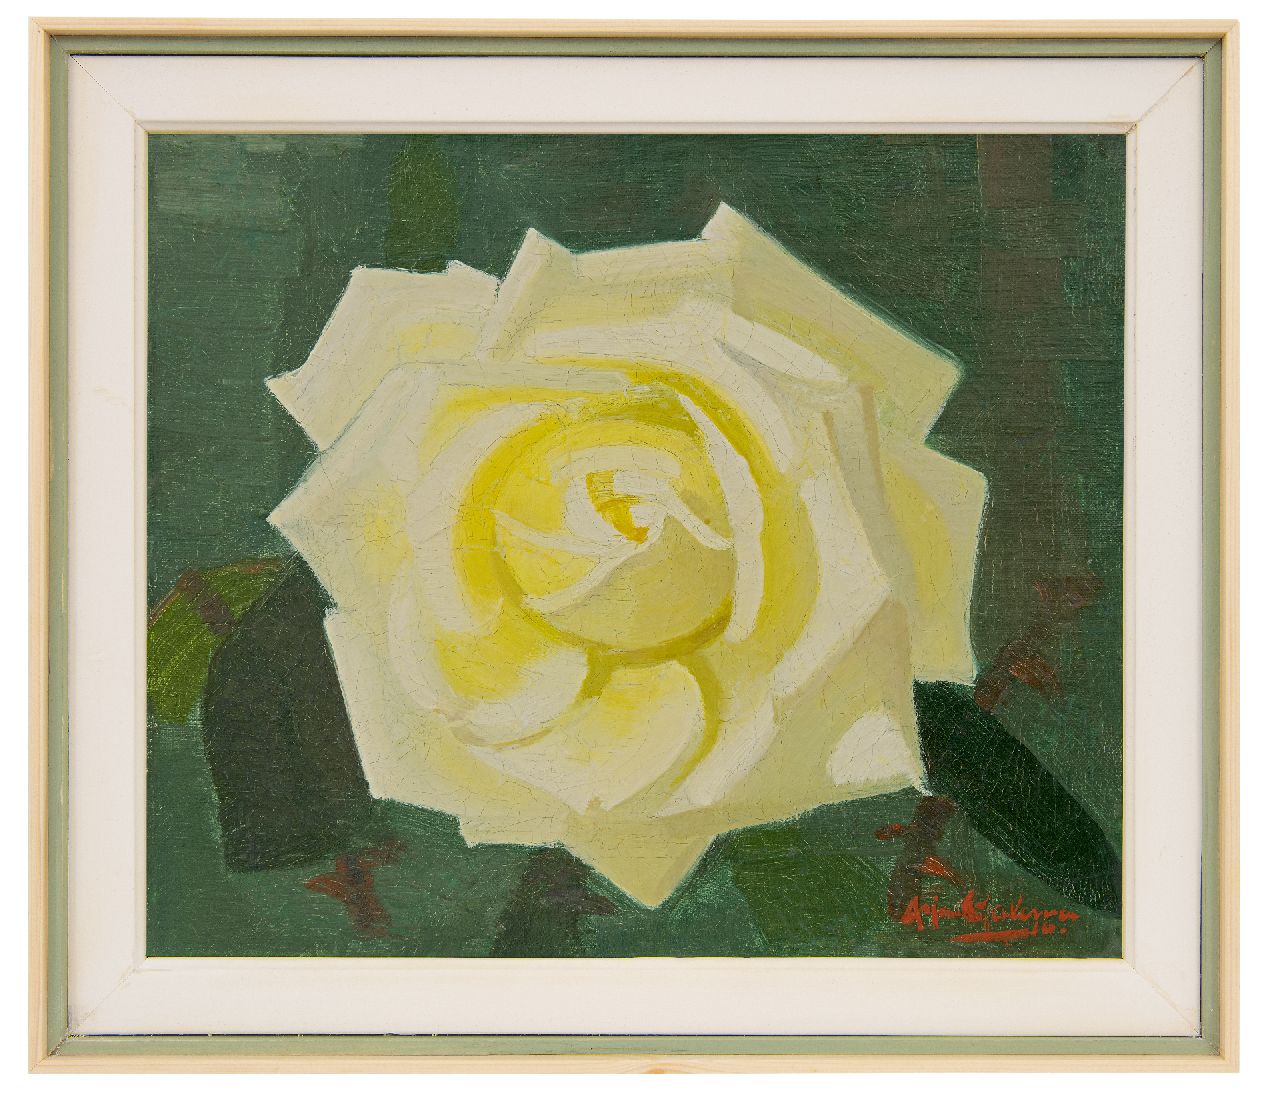 Galema A.  | Arjen Galema | Paintings offered for sale | Yellow rose, oil on canvas 25.3 x 29.6 cm, signed l.r.